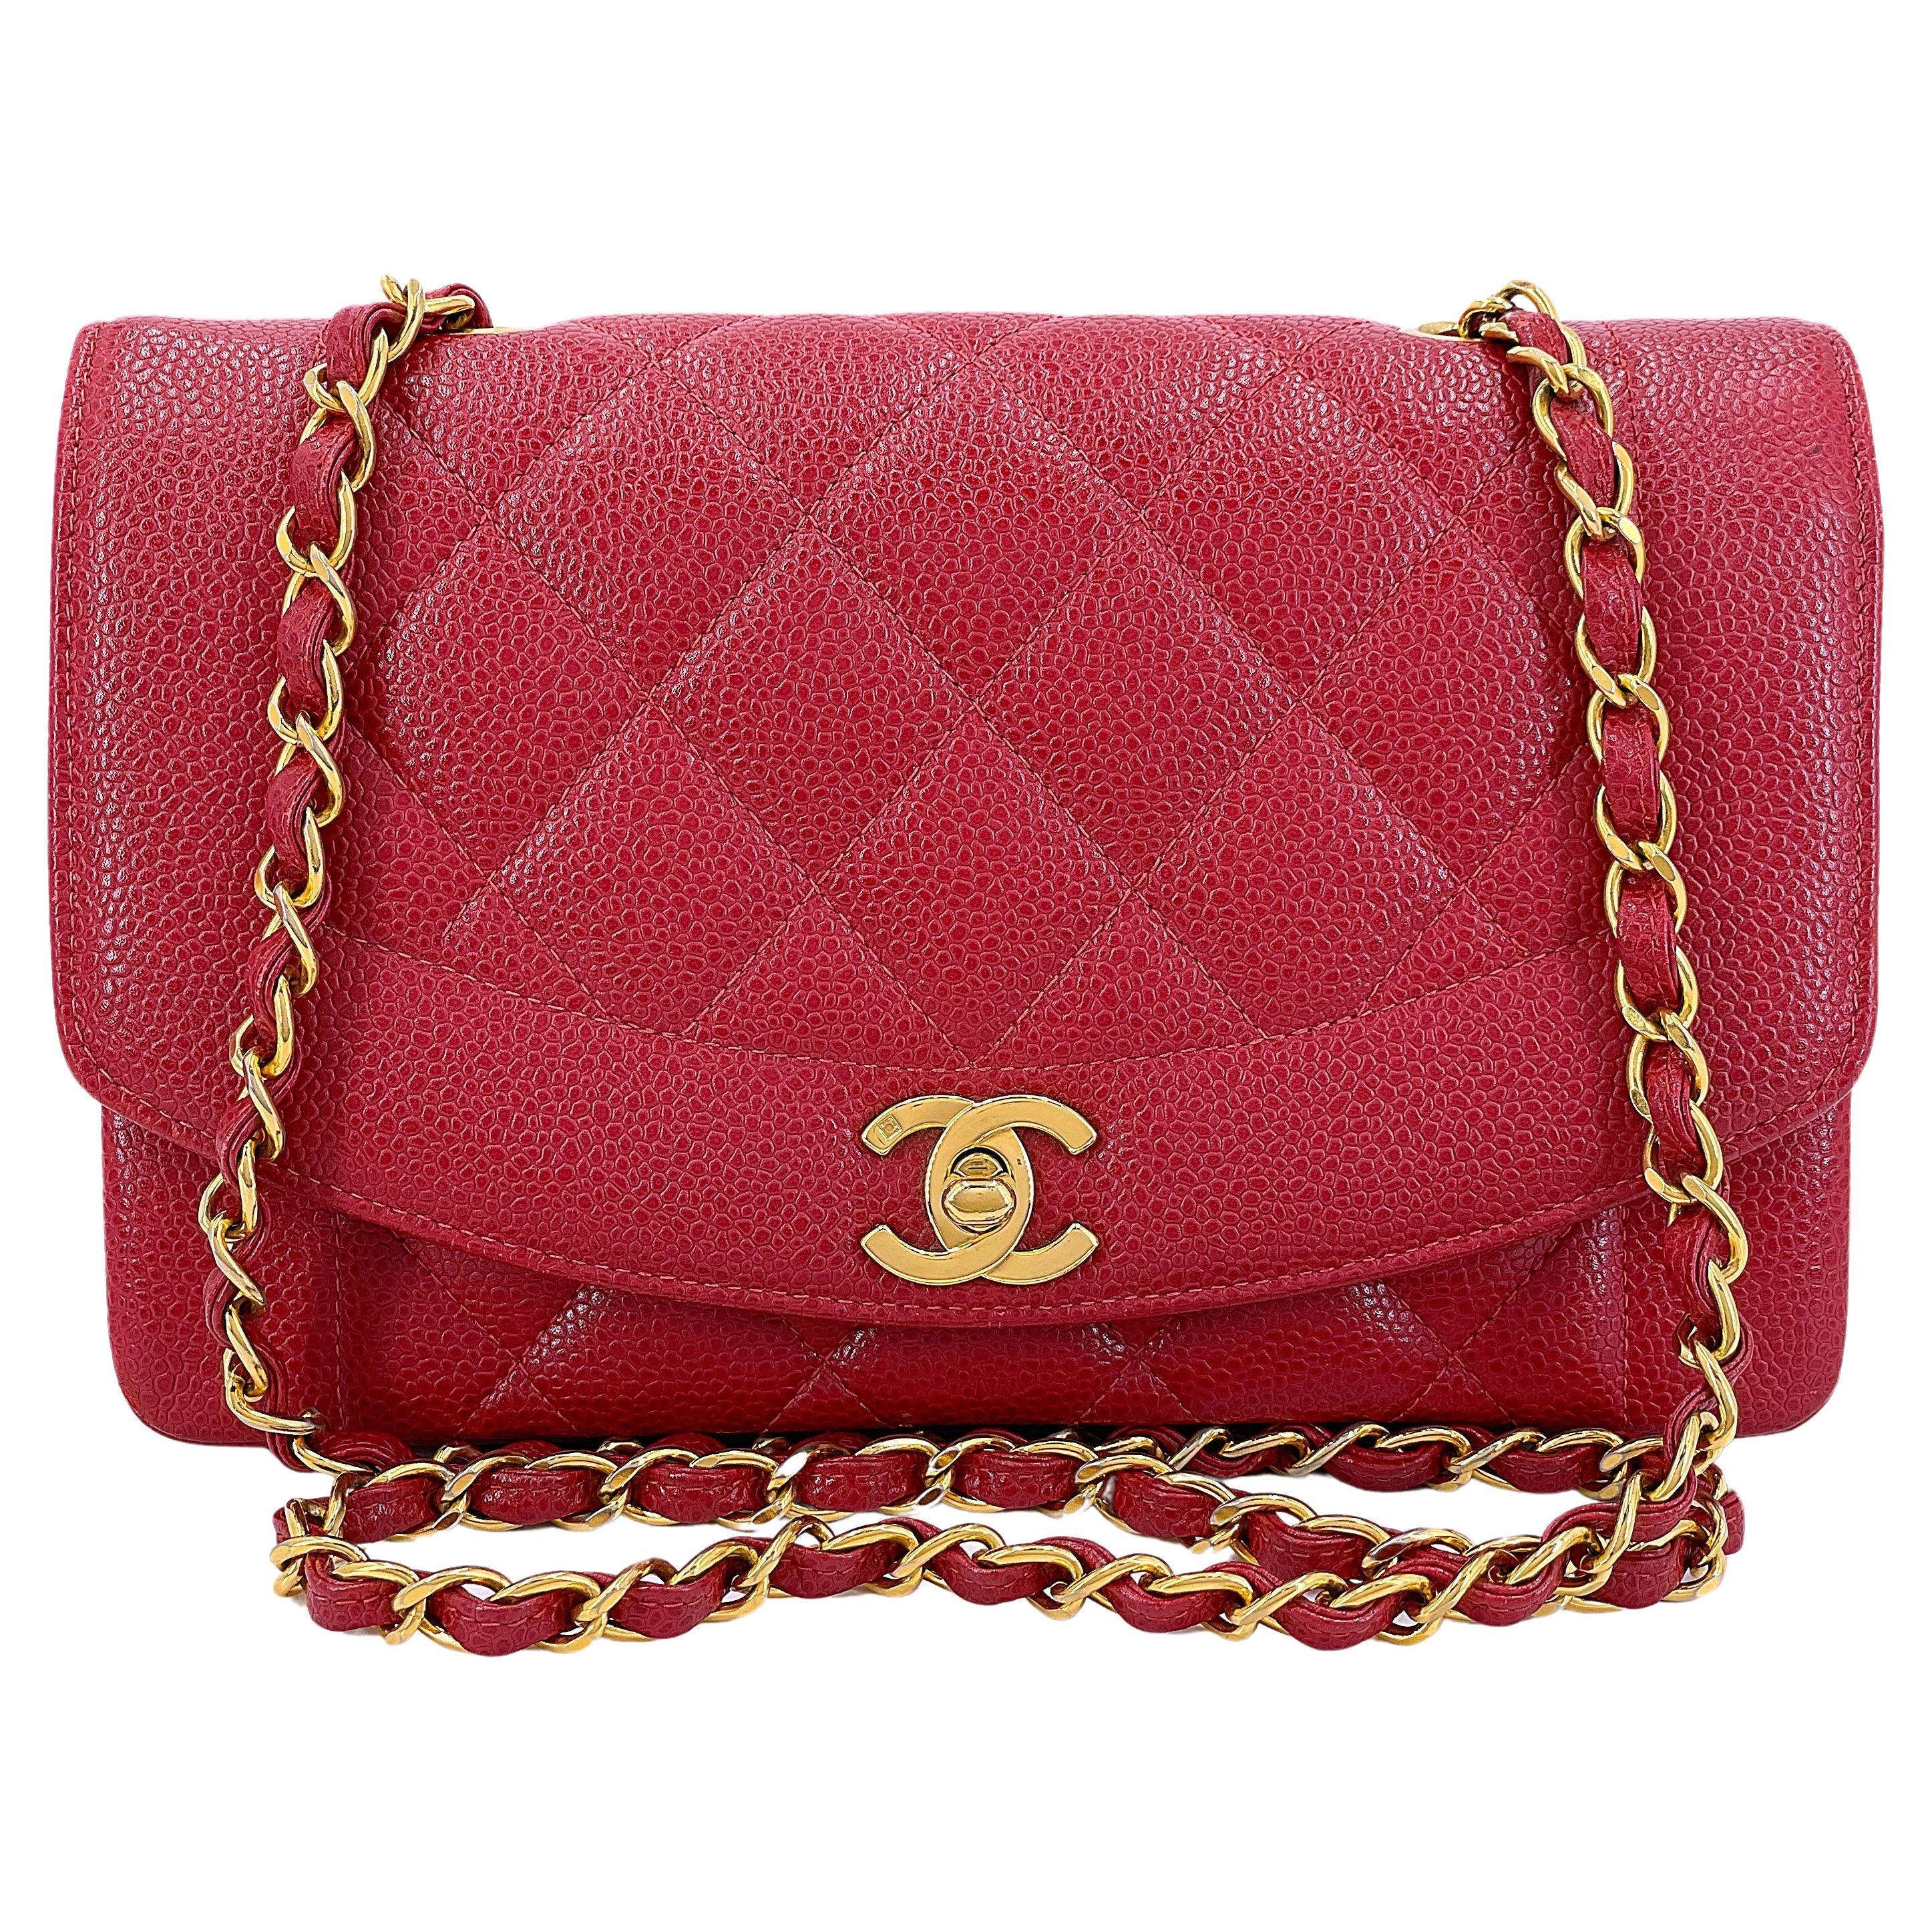 Chanel Vintage Red Caviar Small Diana Flap Bag 24k GHW 67655